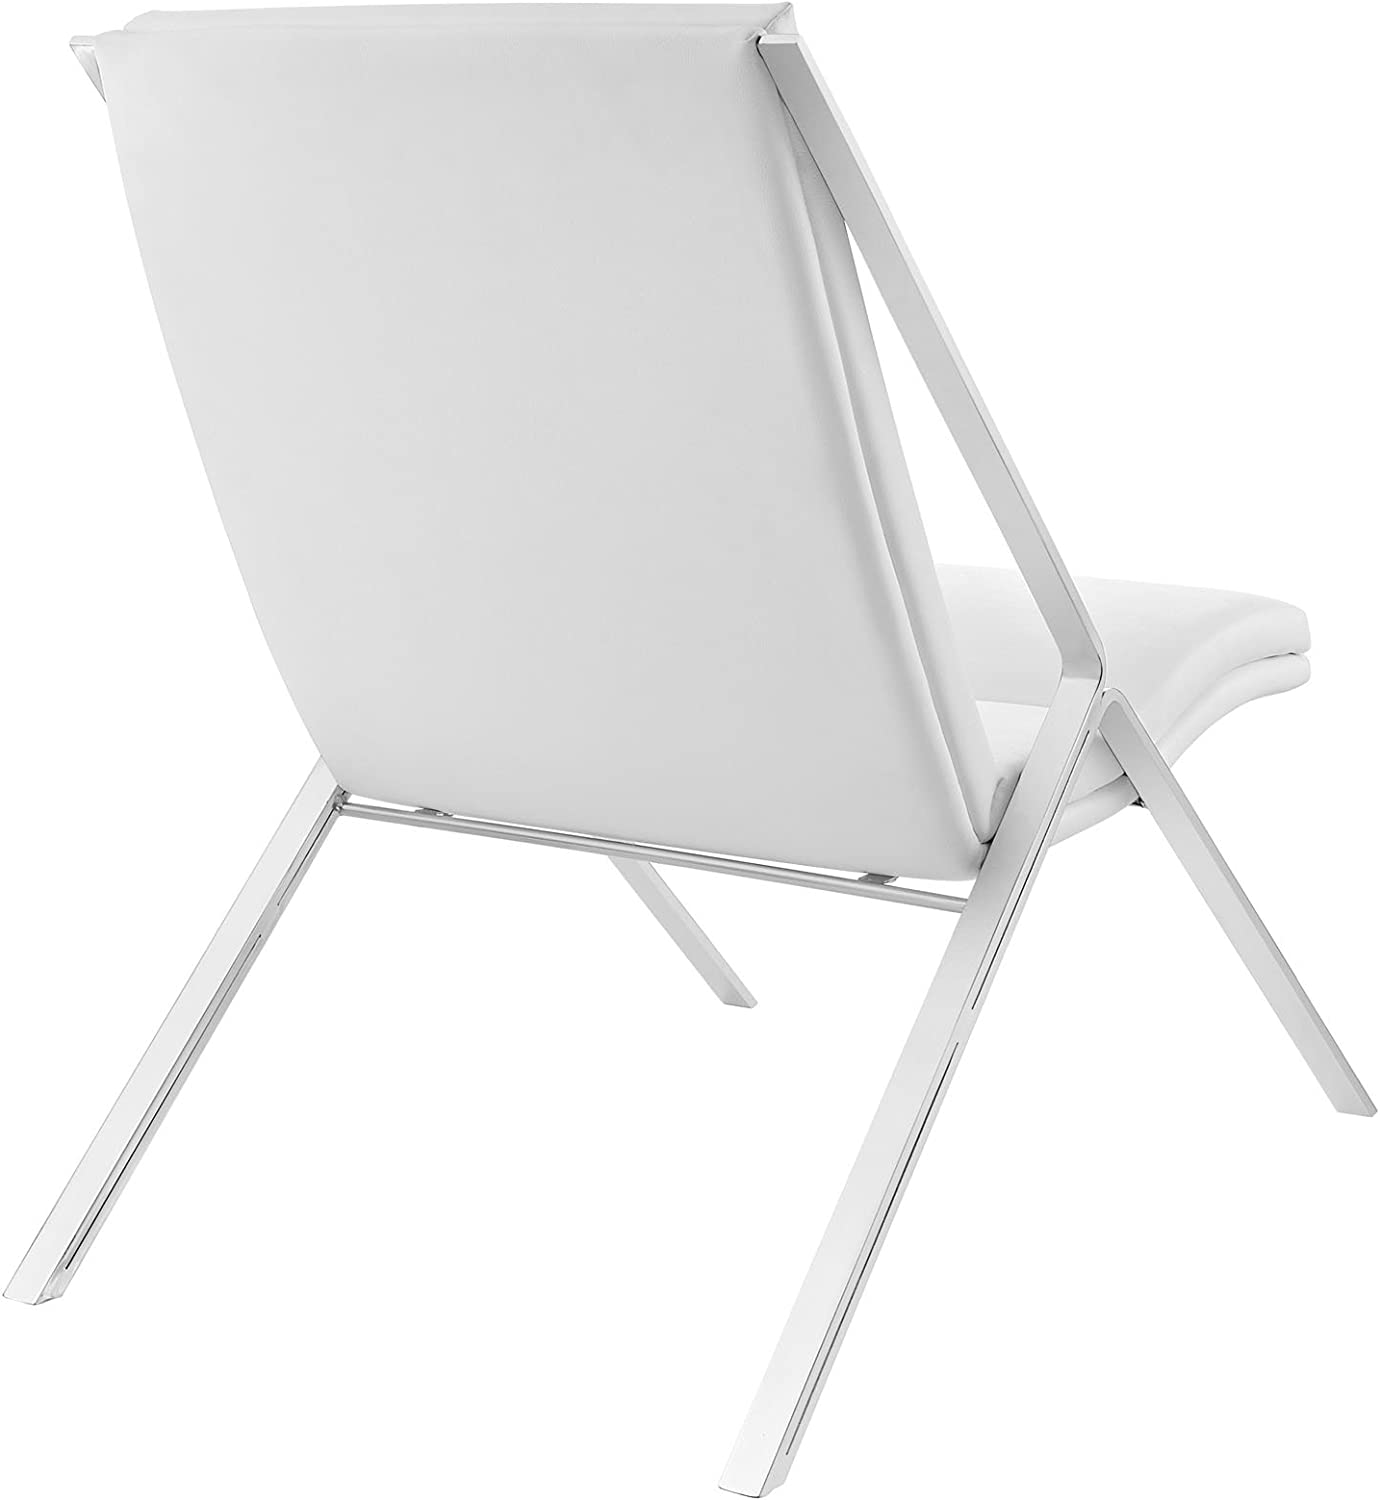 Modway Swing Vinyl Lounge Chair in White